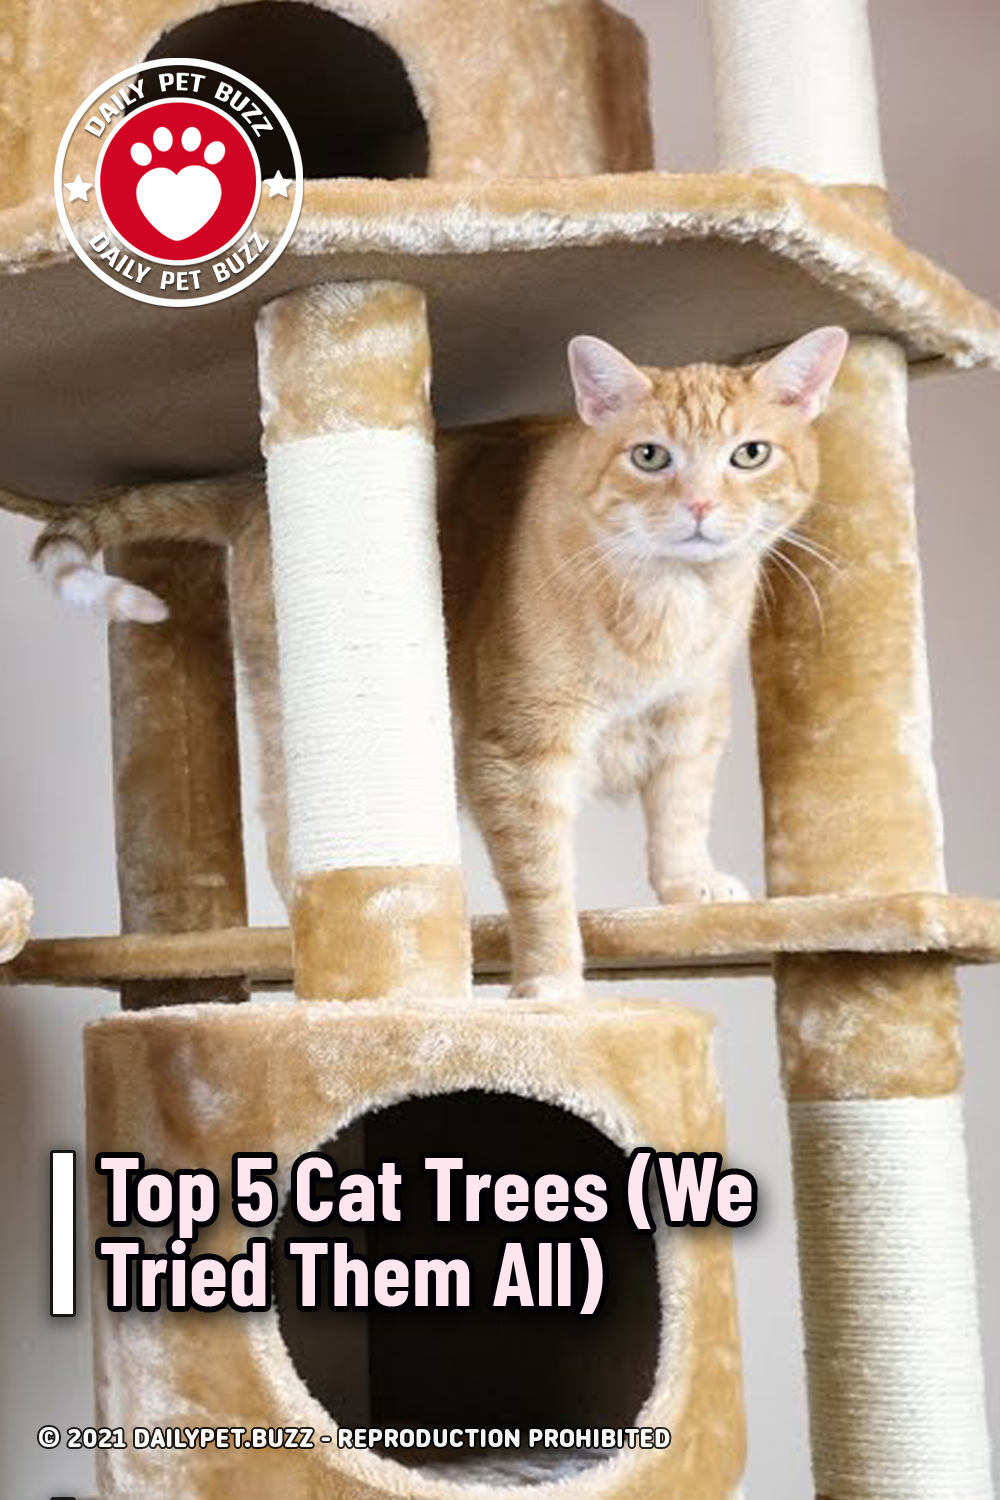 Top 5 Cat Trees (We Tried Them All)